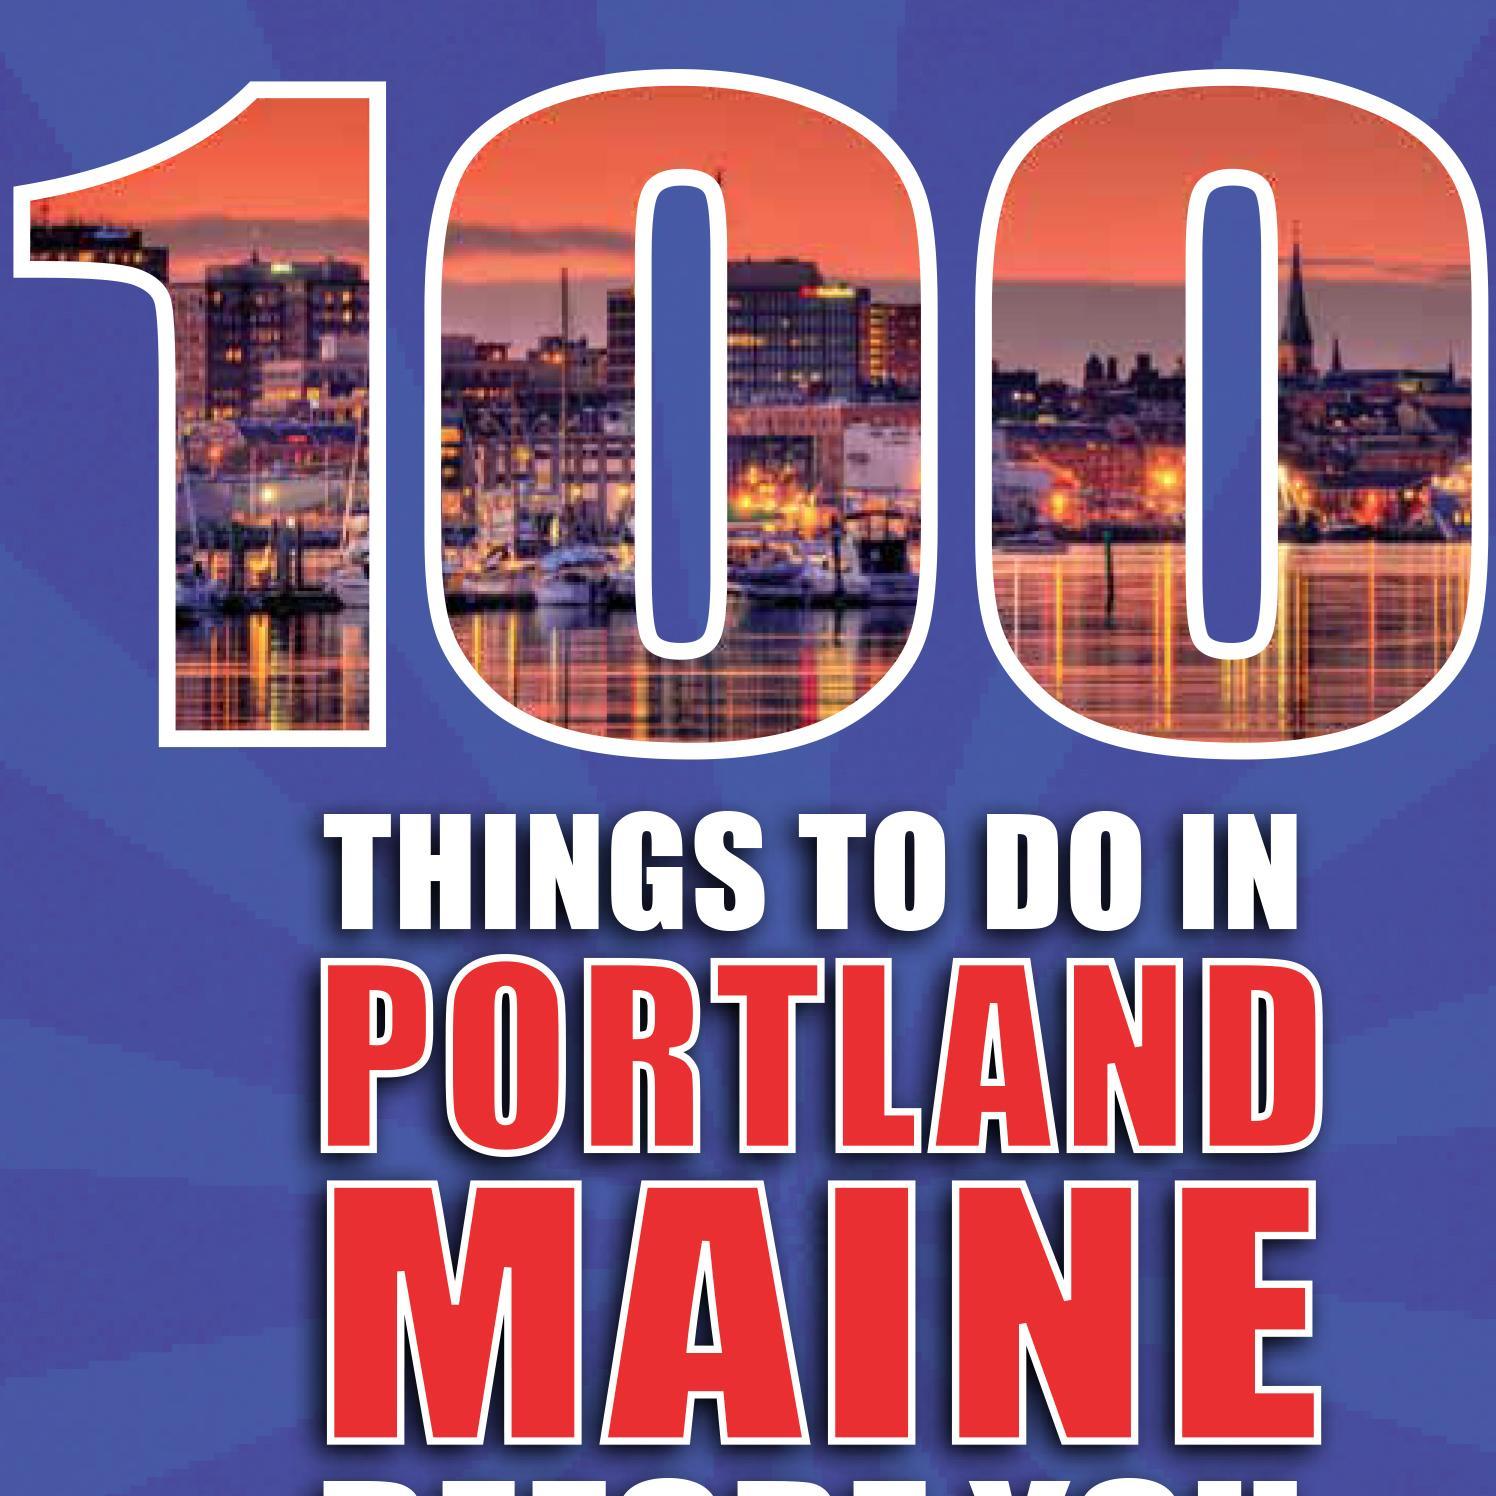 100 Things to Do in Portland, Maine Before You Die is a book into the REAL Portland–much unknown even to locals! On sale now at local shops and online.